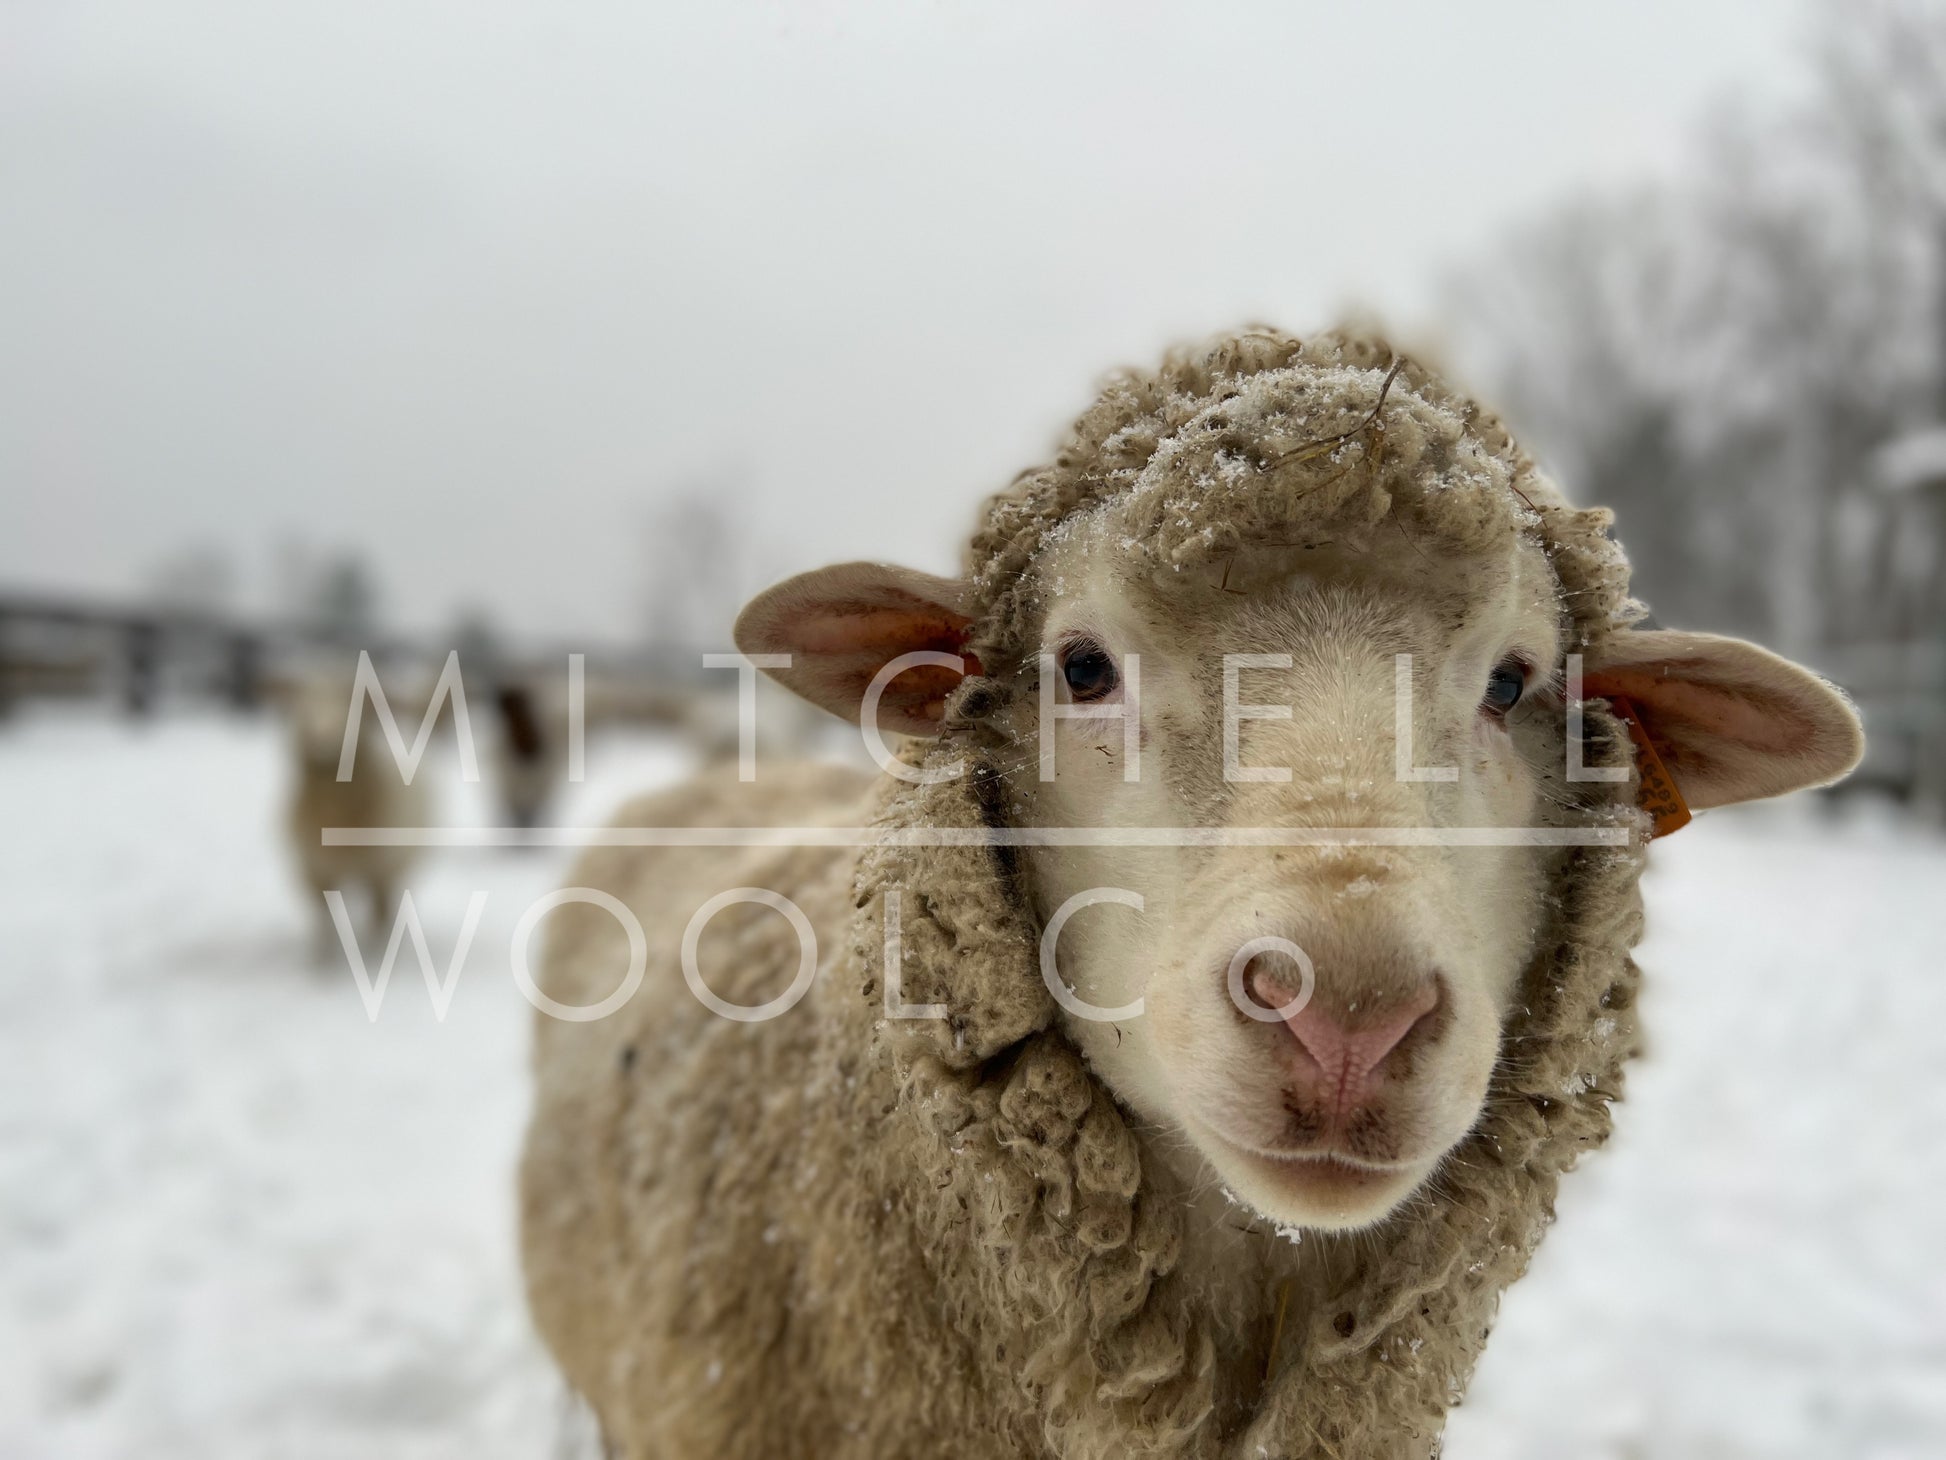 Charlotte, a Cormo Ewe Sheep stands ready for a smooch in a snowy pasture